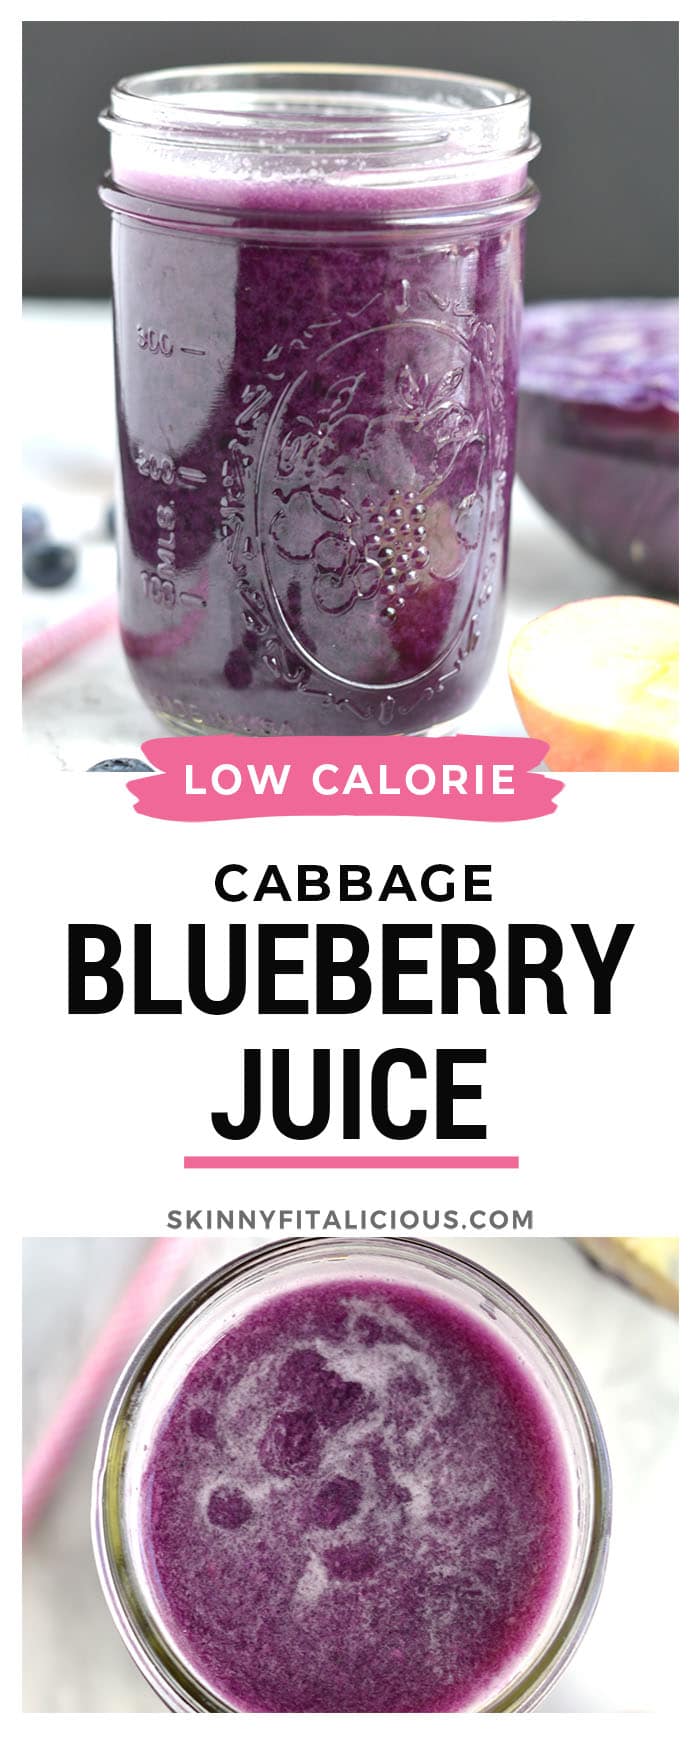 This Blueberry Cabbage Juice is a refreshing, luscious and sweet drink laced with hints of apple and blueberry flavors and zero taste of cabbage. A warm weather drink that will quench your thirst and make your taste buds sing! Gluten Free + Low Calorie + Vegan + Paleo